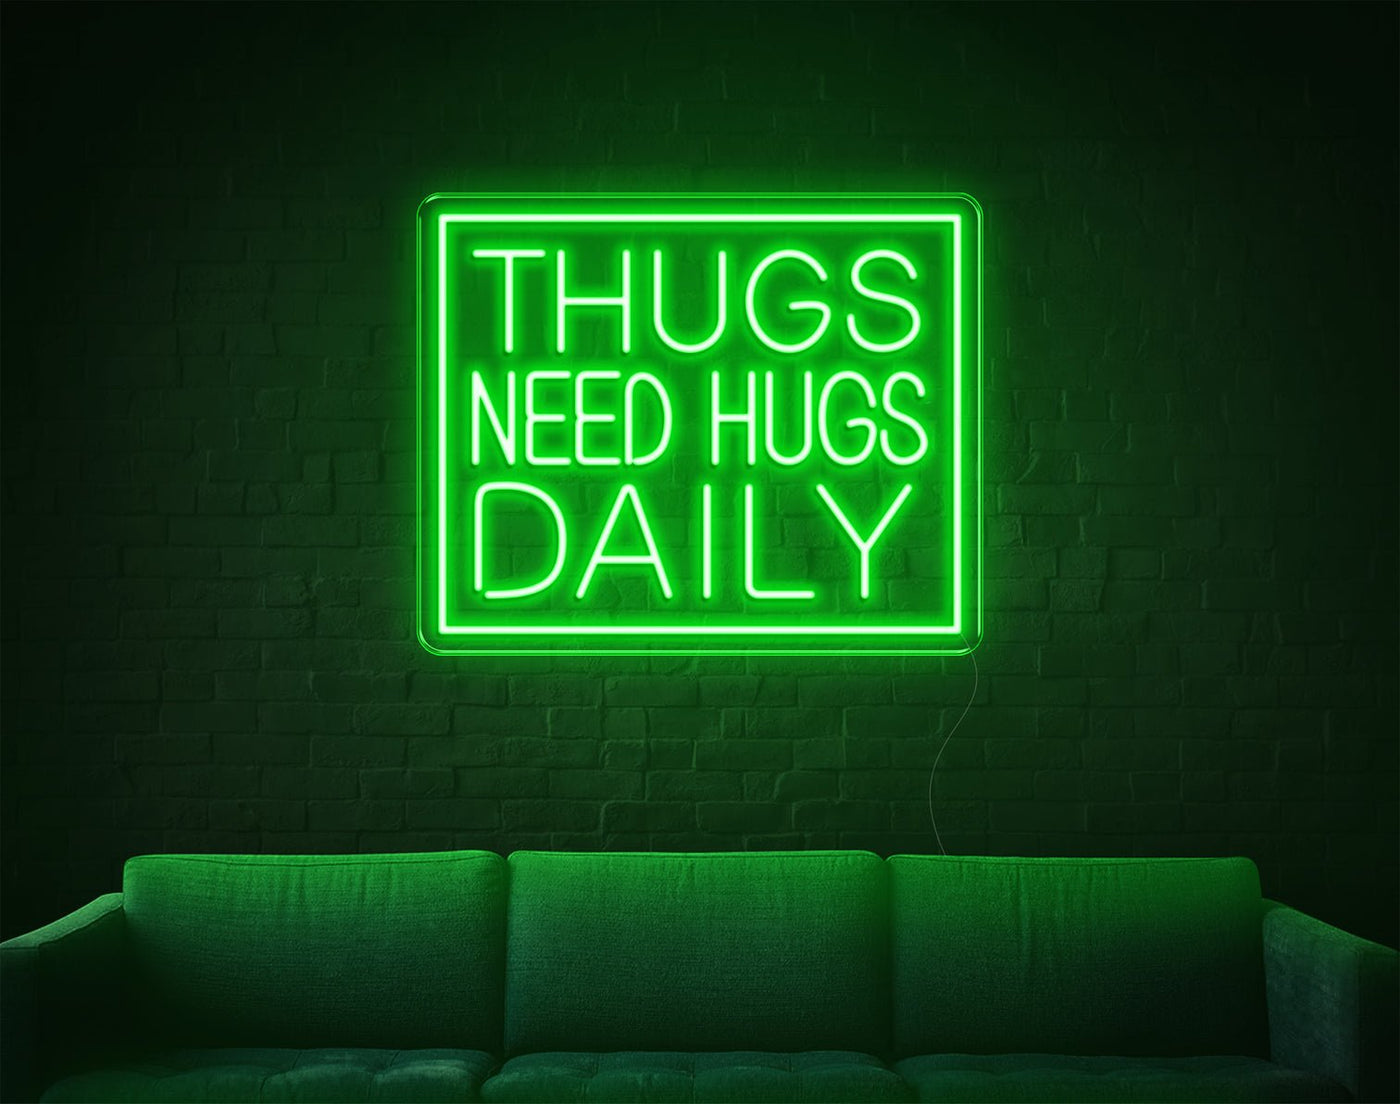 Thugs Need Hugs Daily LED Neon Sign - 18inch x 22inchHot Pink